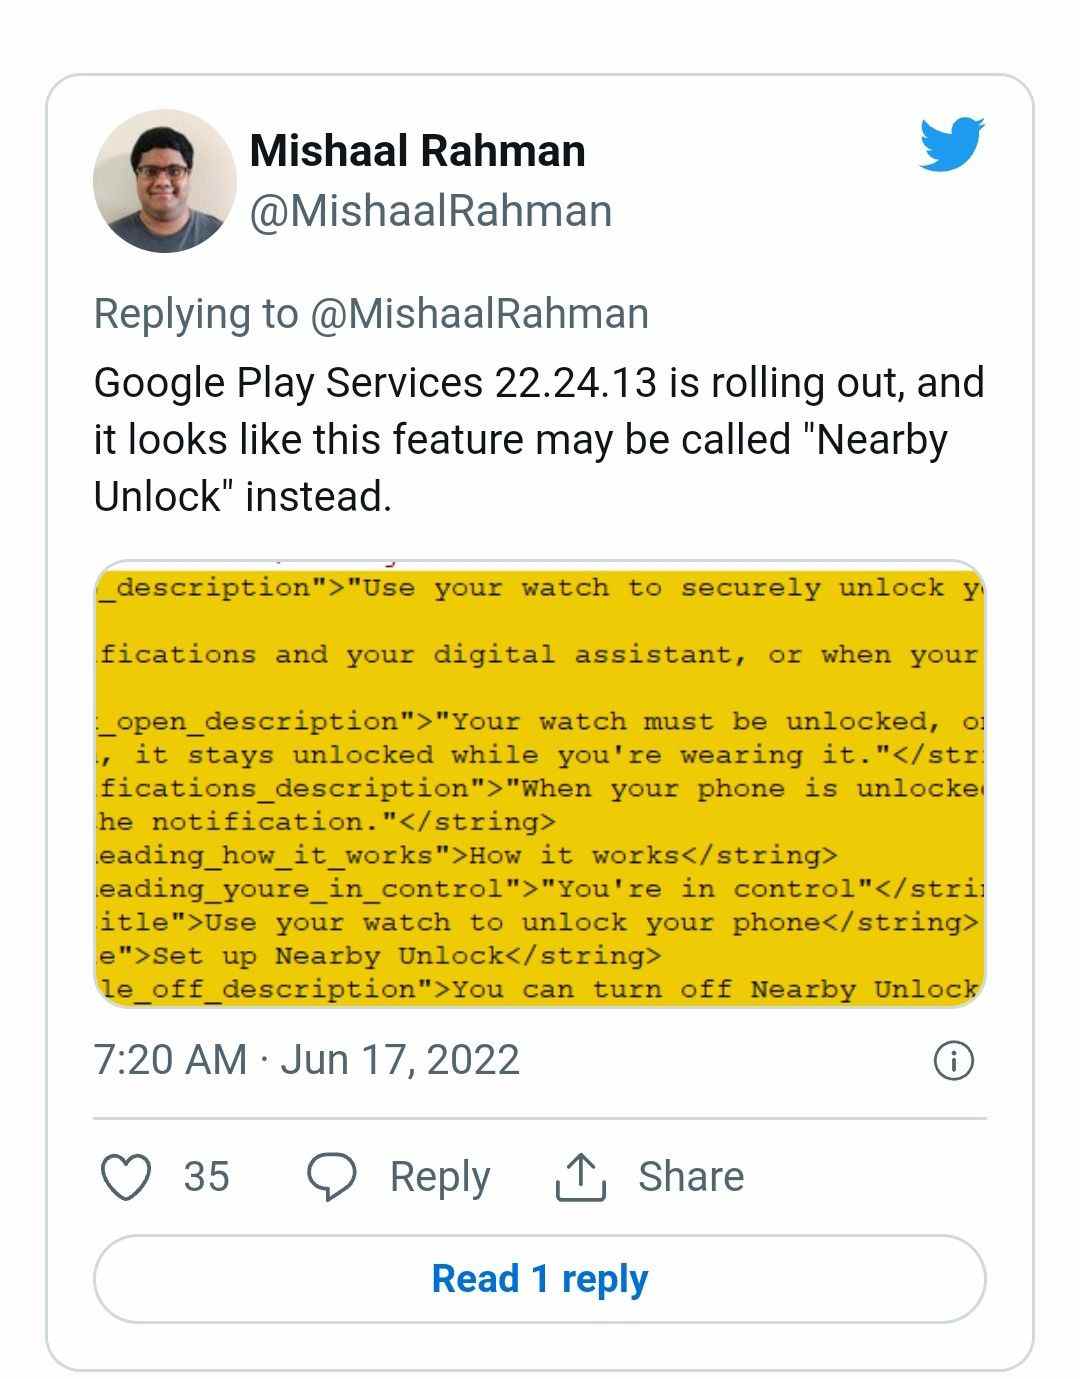 Google Nearby Unlock feature to arrive with Android 13